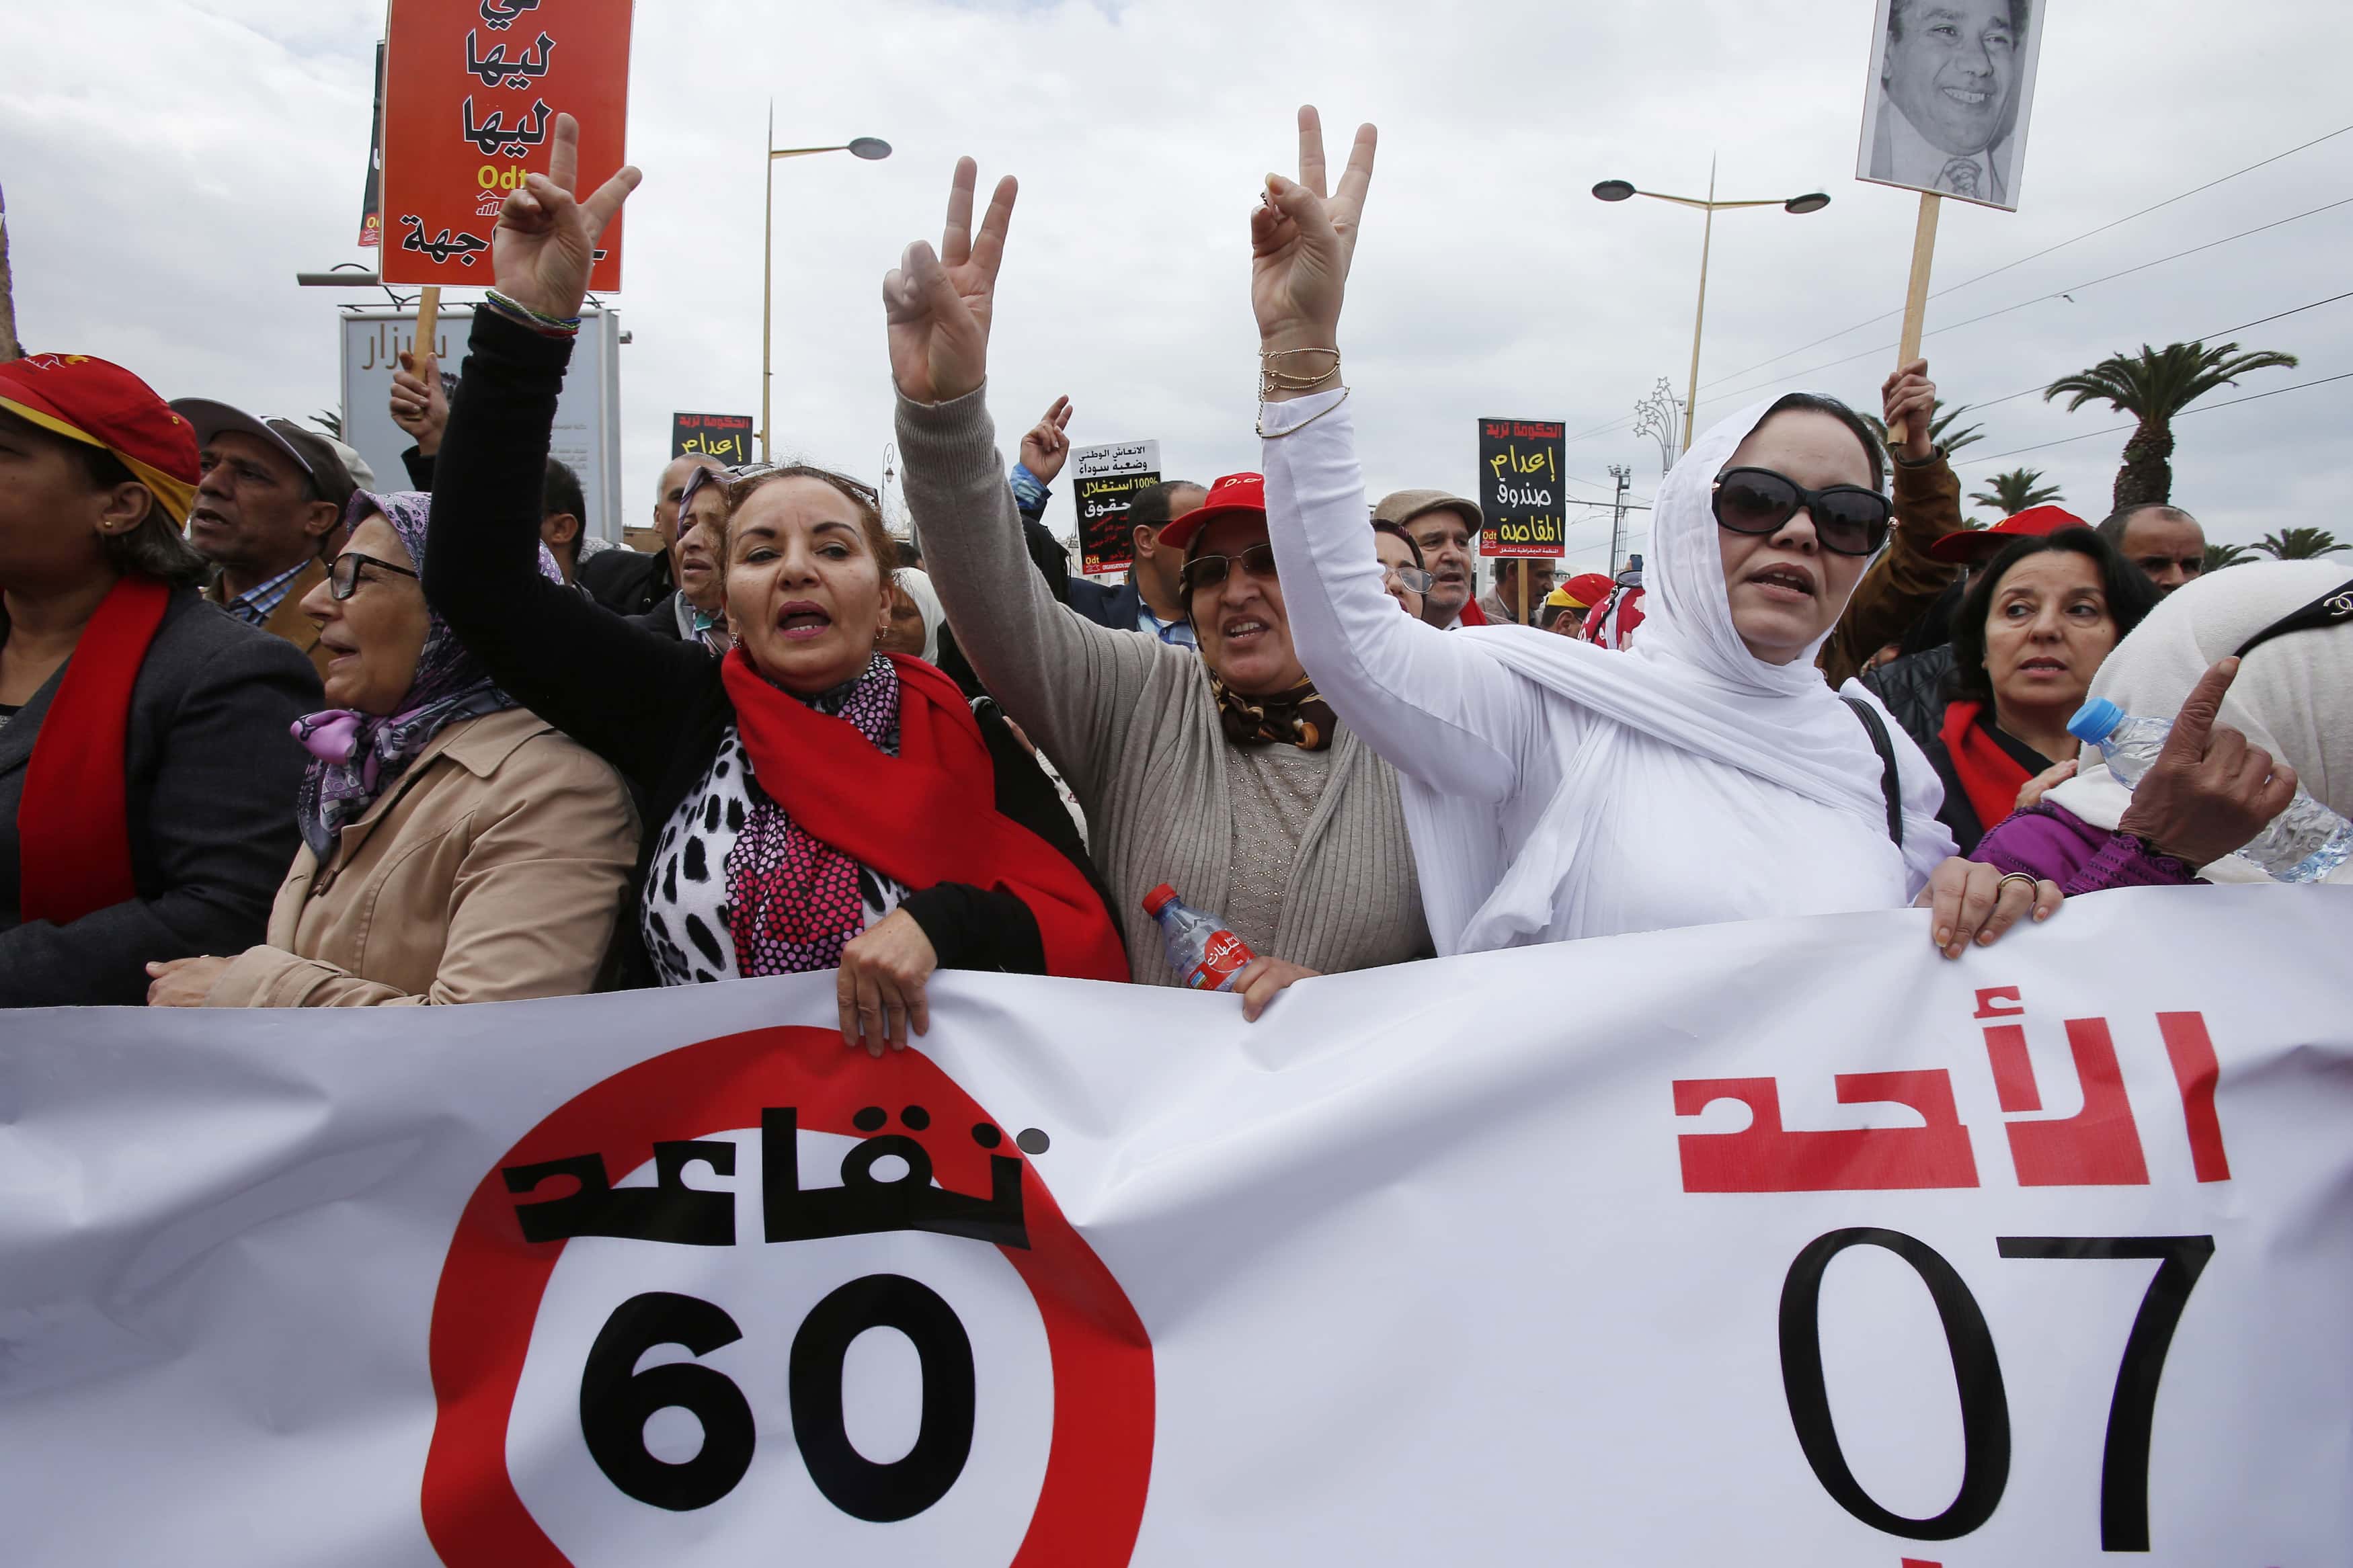 Protesters take part in a demonstration called by the Democratic Labor Organization (ODT) for better working conditions and retirement in Rabat, Morocco February 7, 2016. The sign reads, "Retirement at 60". , REUTERS/Youssef Boudlal